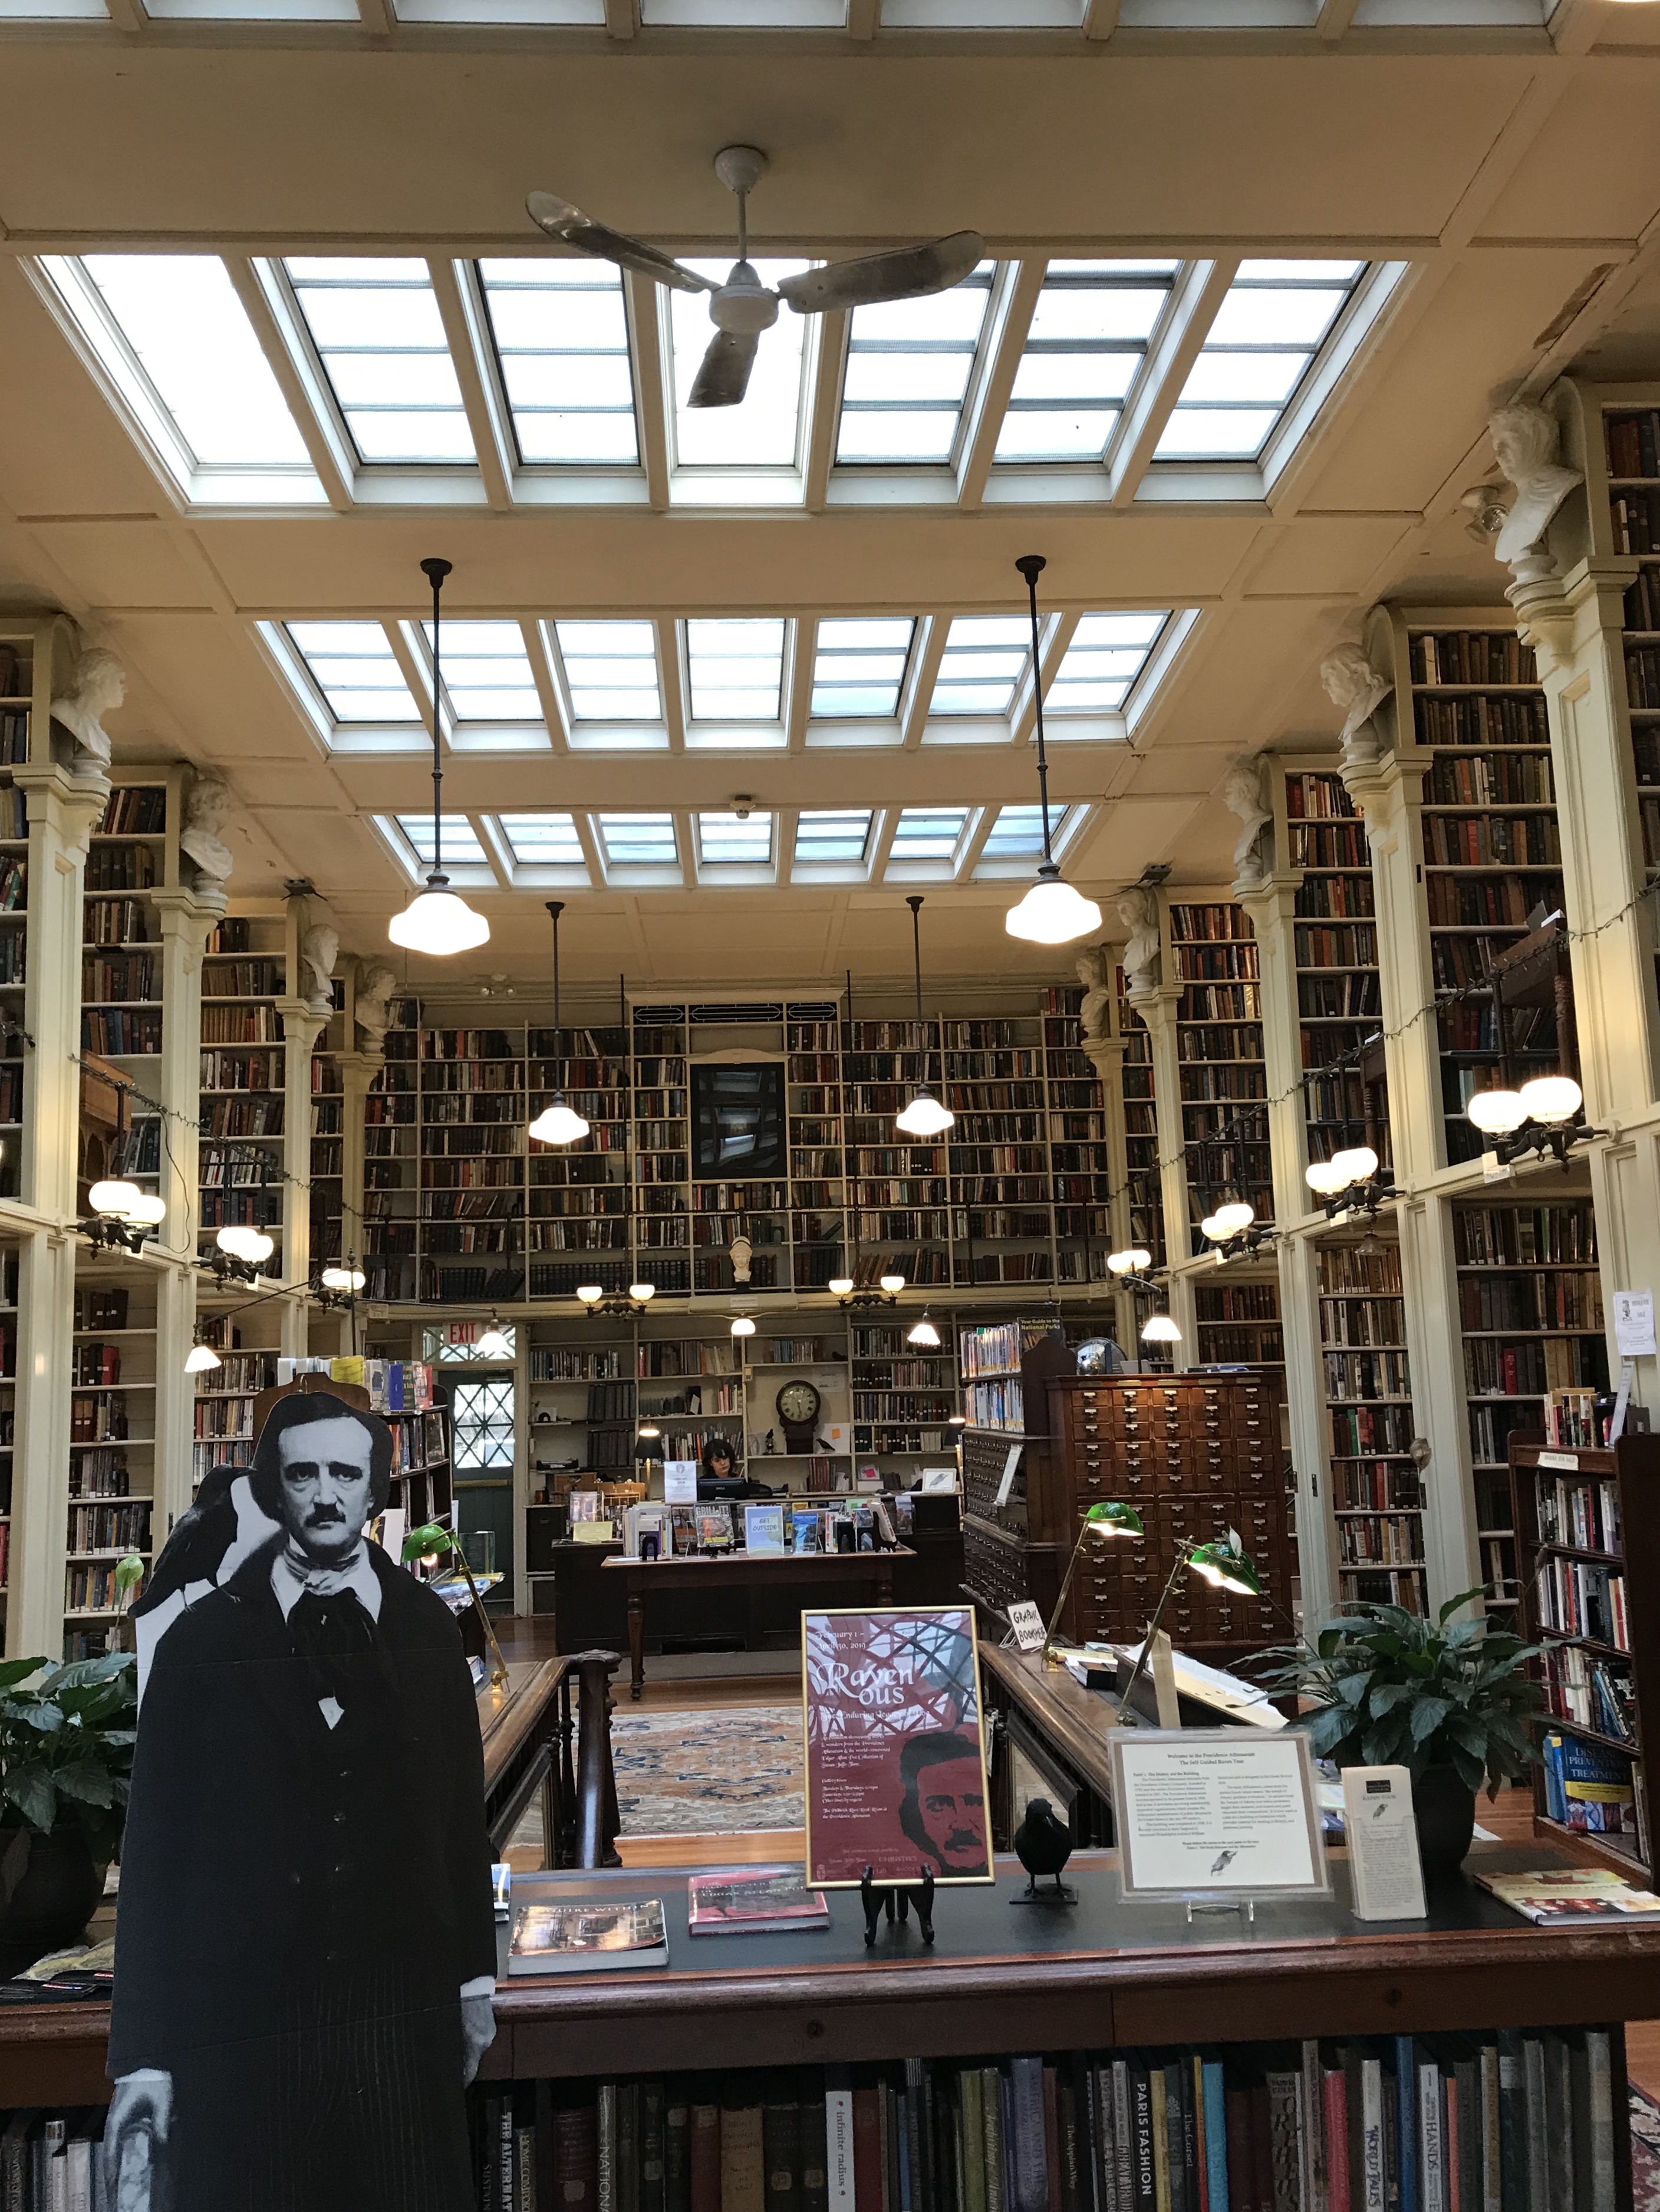 The Providence Athneaeum - a very cool library.  